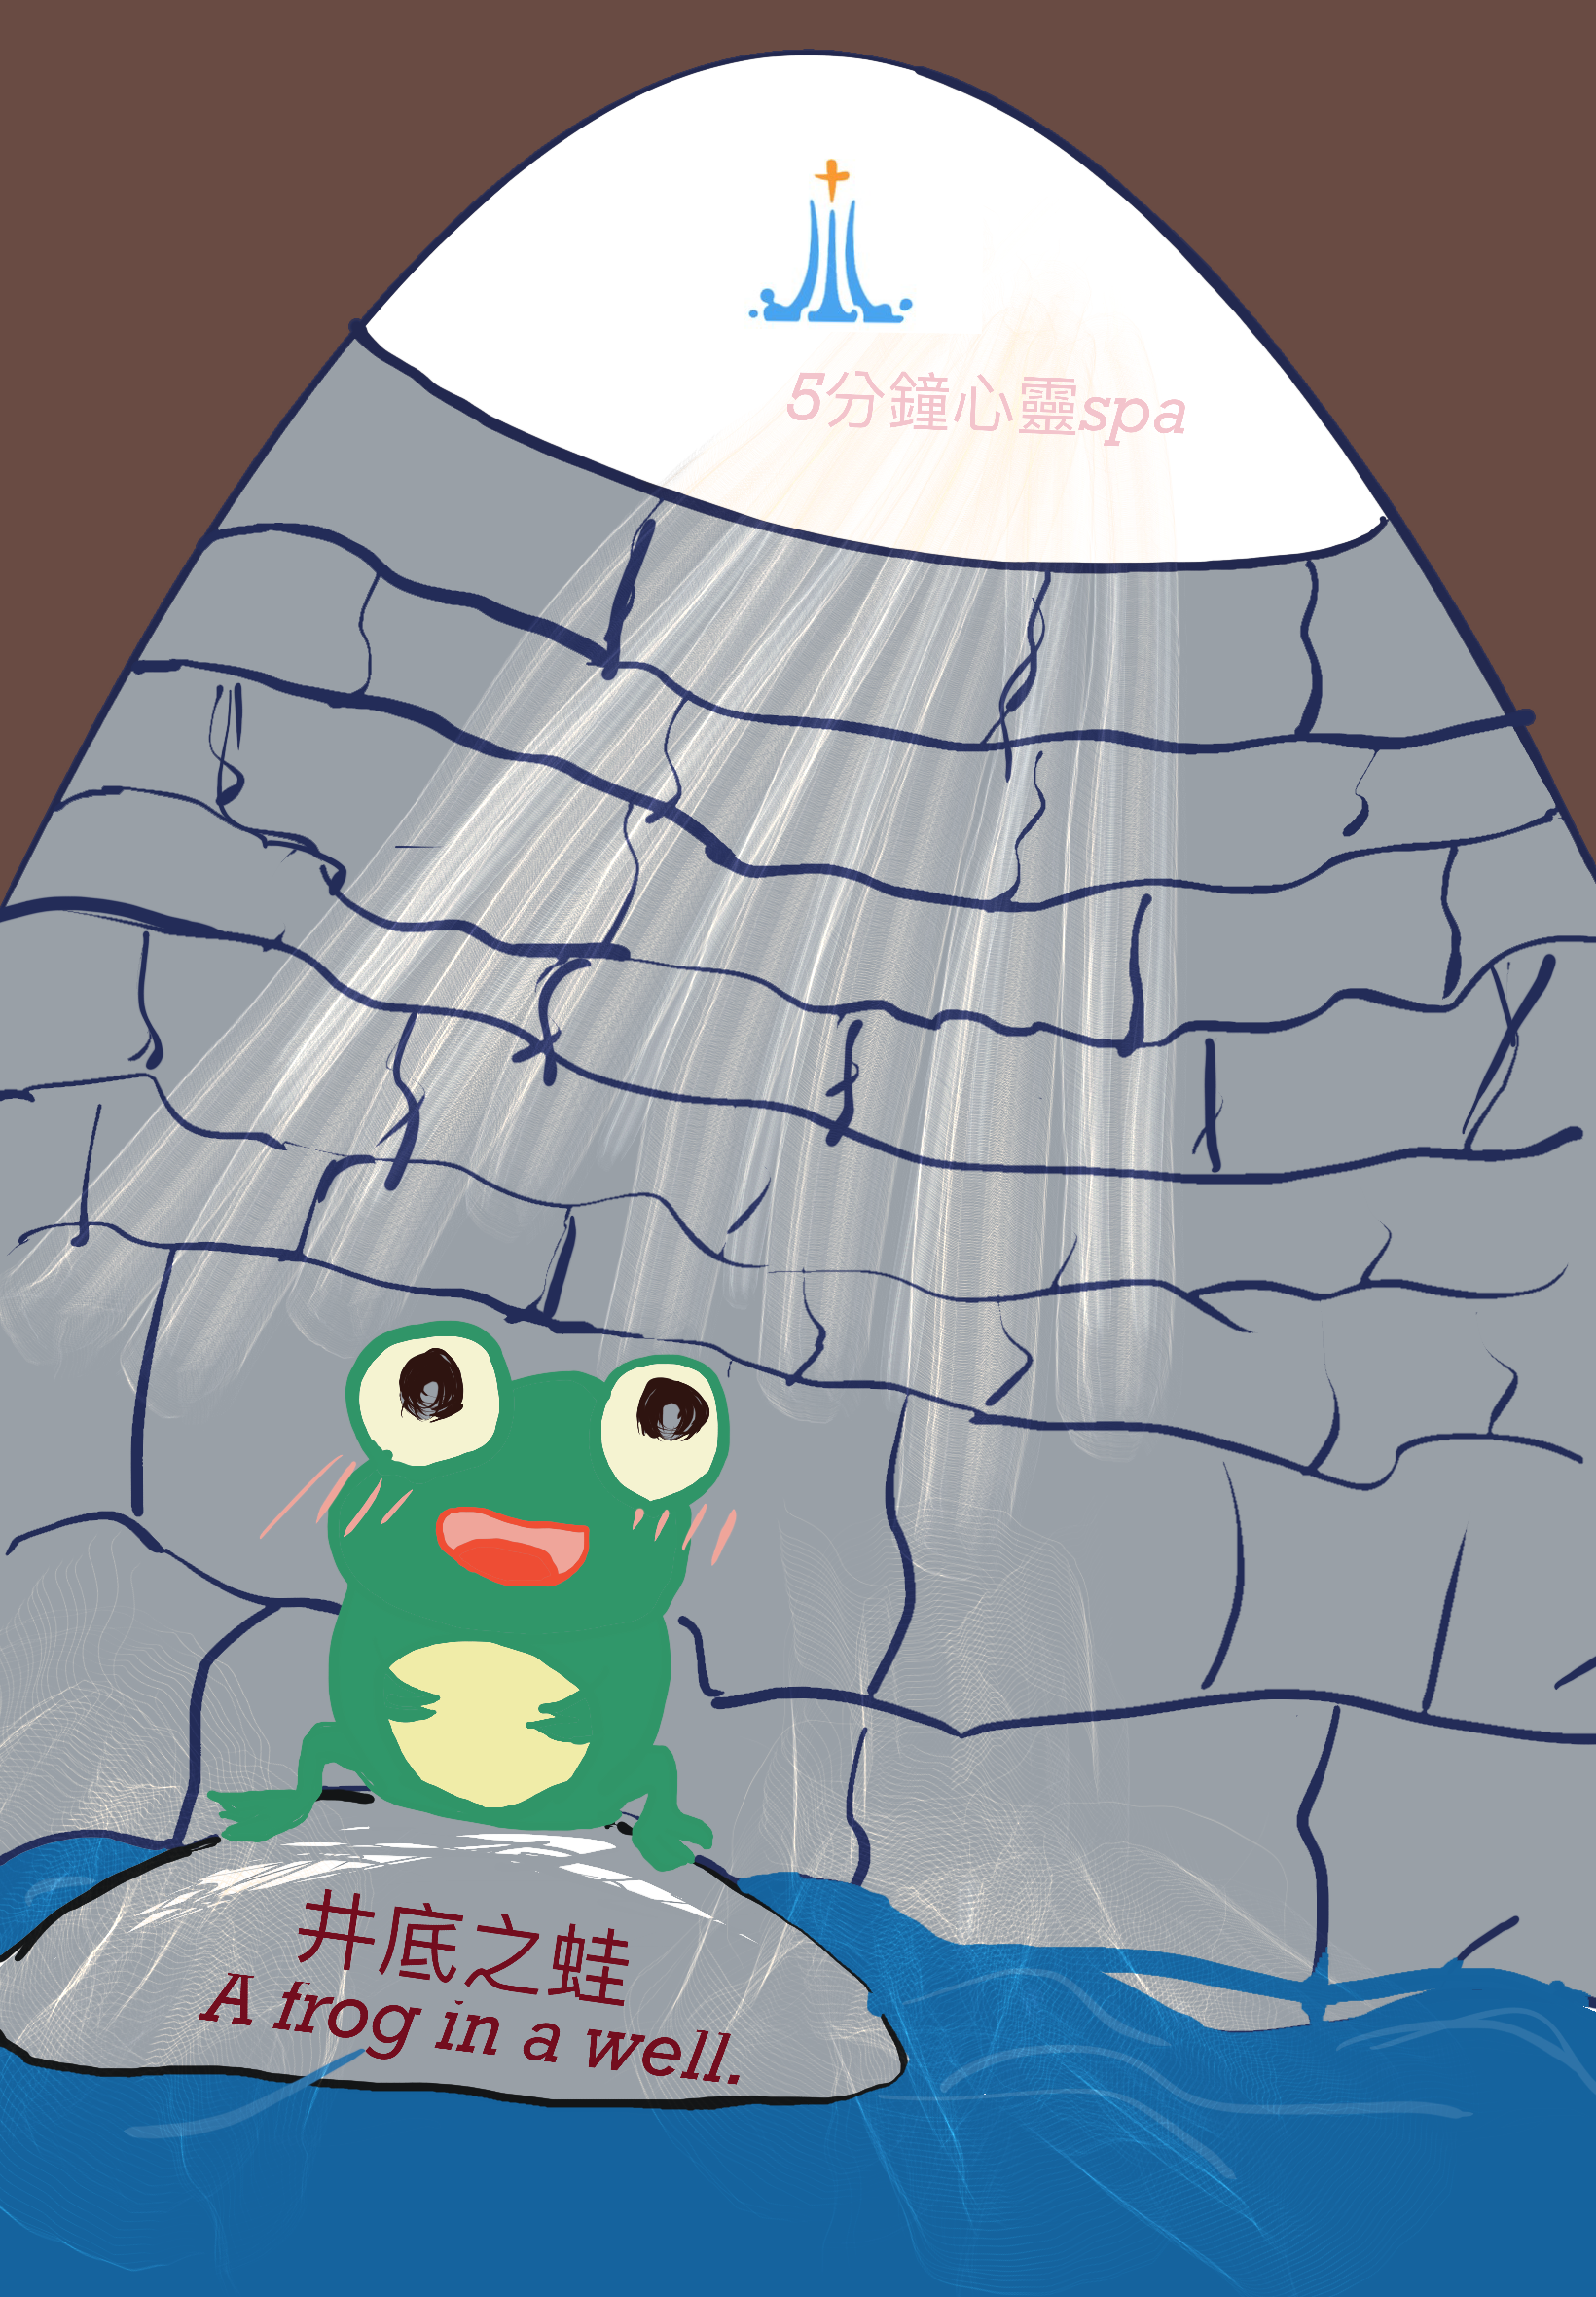 2021/11/15『A frog in a well 』